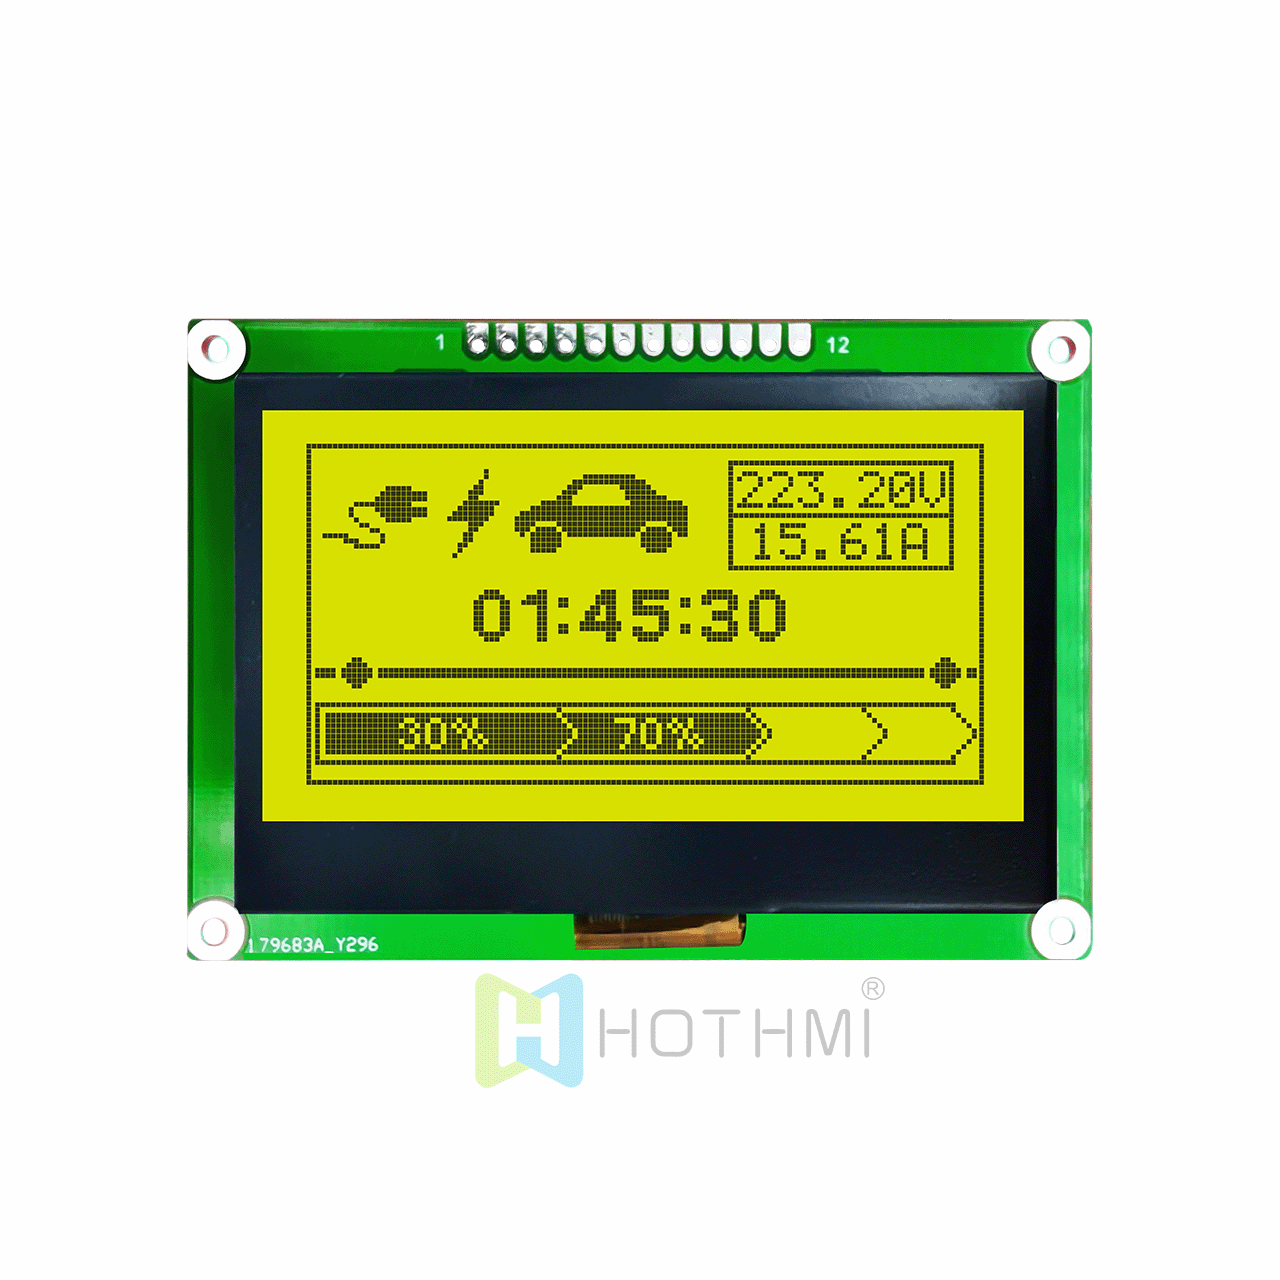 2.7-inch LCD12864 LCD screen/LCM128x64 graphic dot matrix module/yellow-green backlight/with Chinese font library